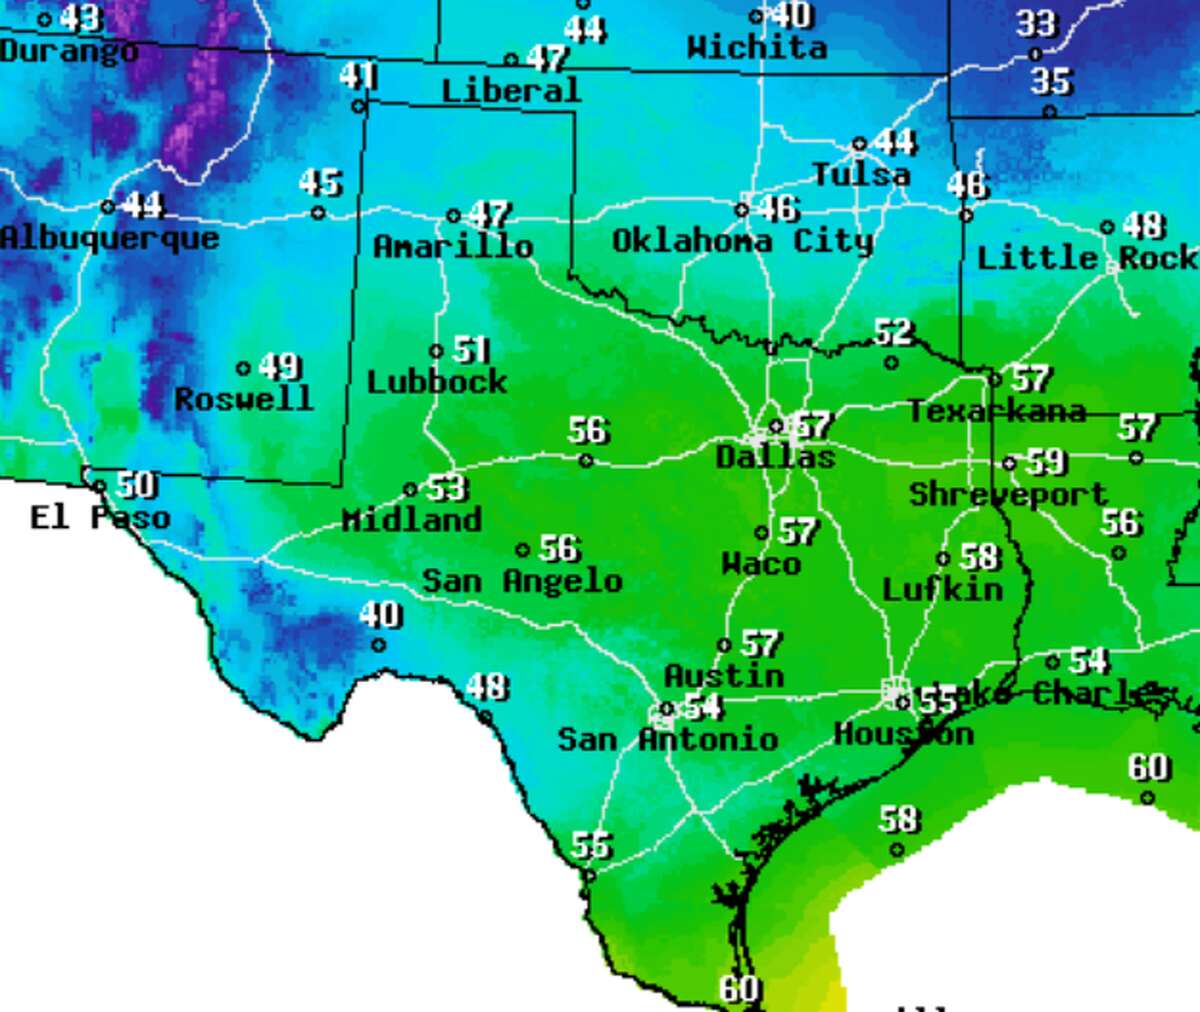 Chilly temperatures forecasted across Texas for Saturday